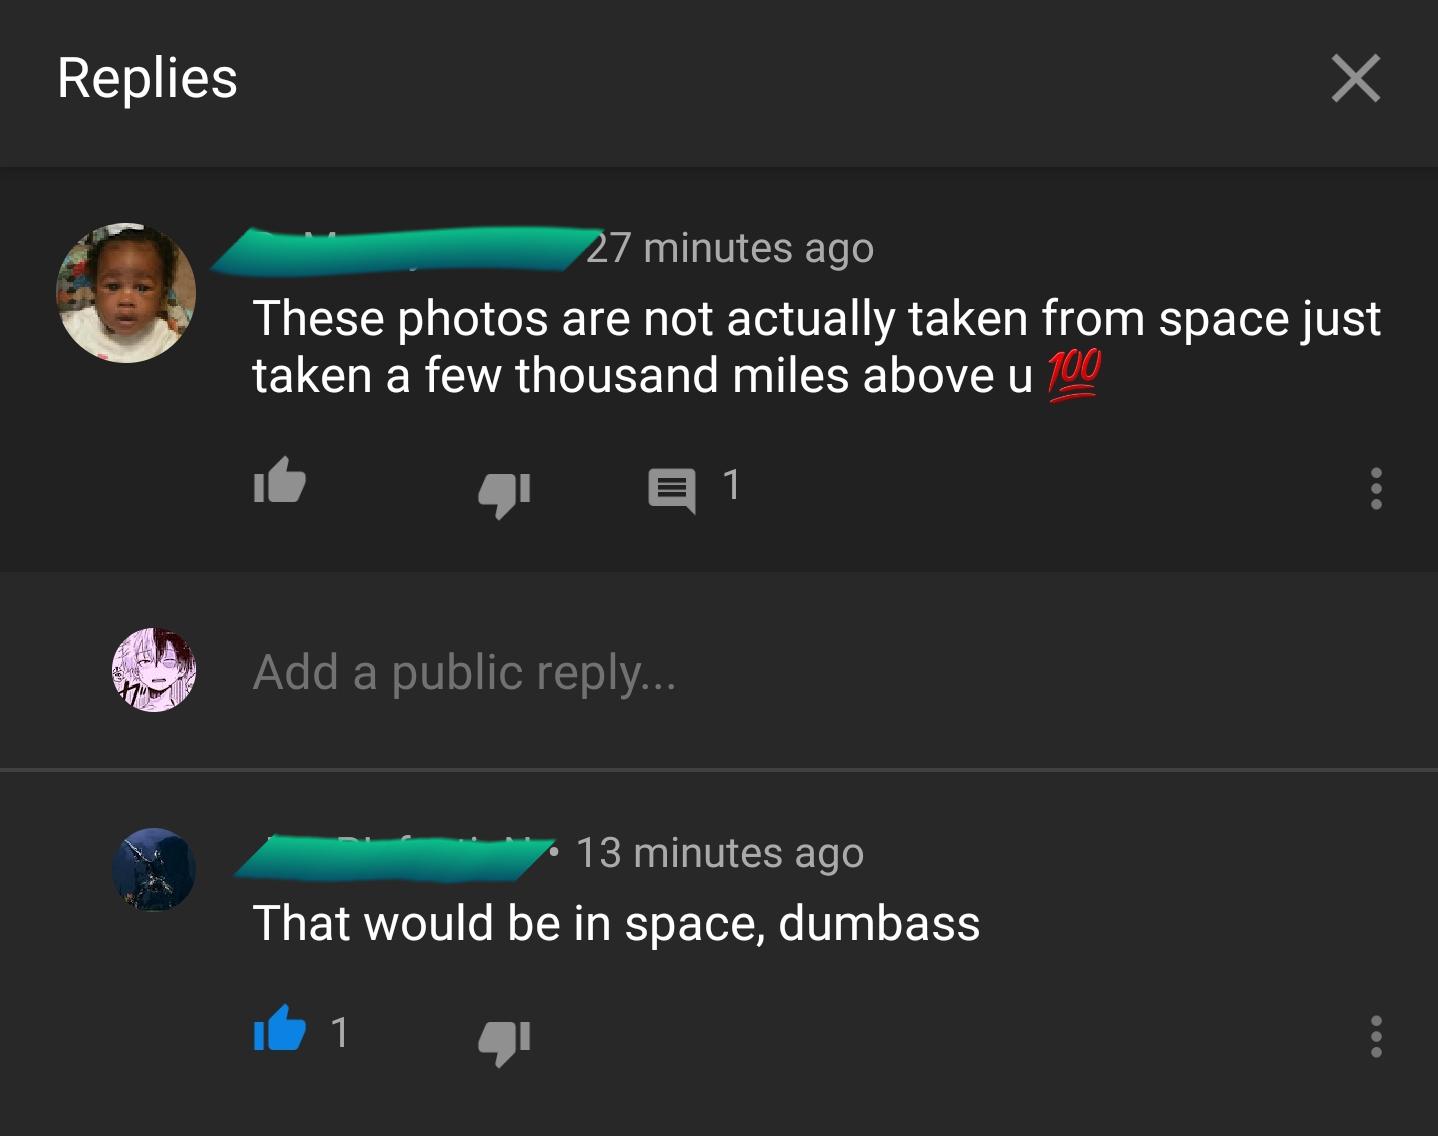 Replies 27 minutes ago These photos are not actually taken from space just taken a few thousand miles above u 700 E 1 Add a public ... 13 minutes ago That would be in space, dumbass it 1 g